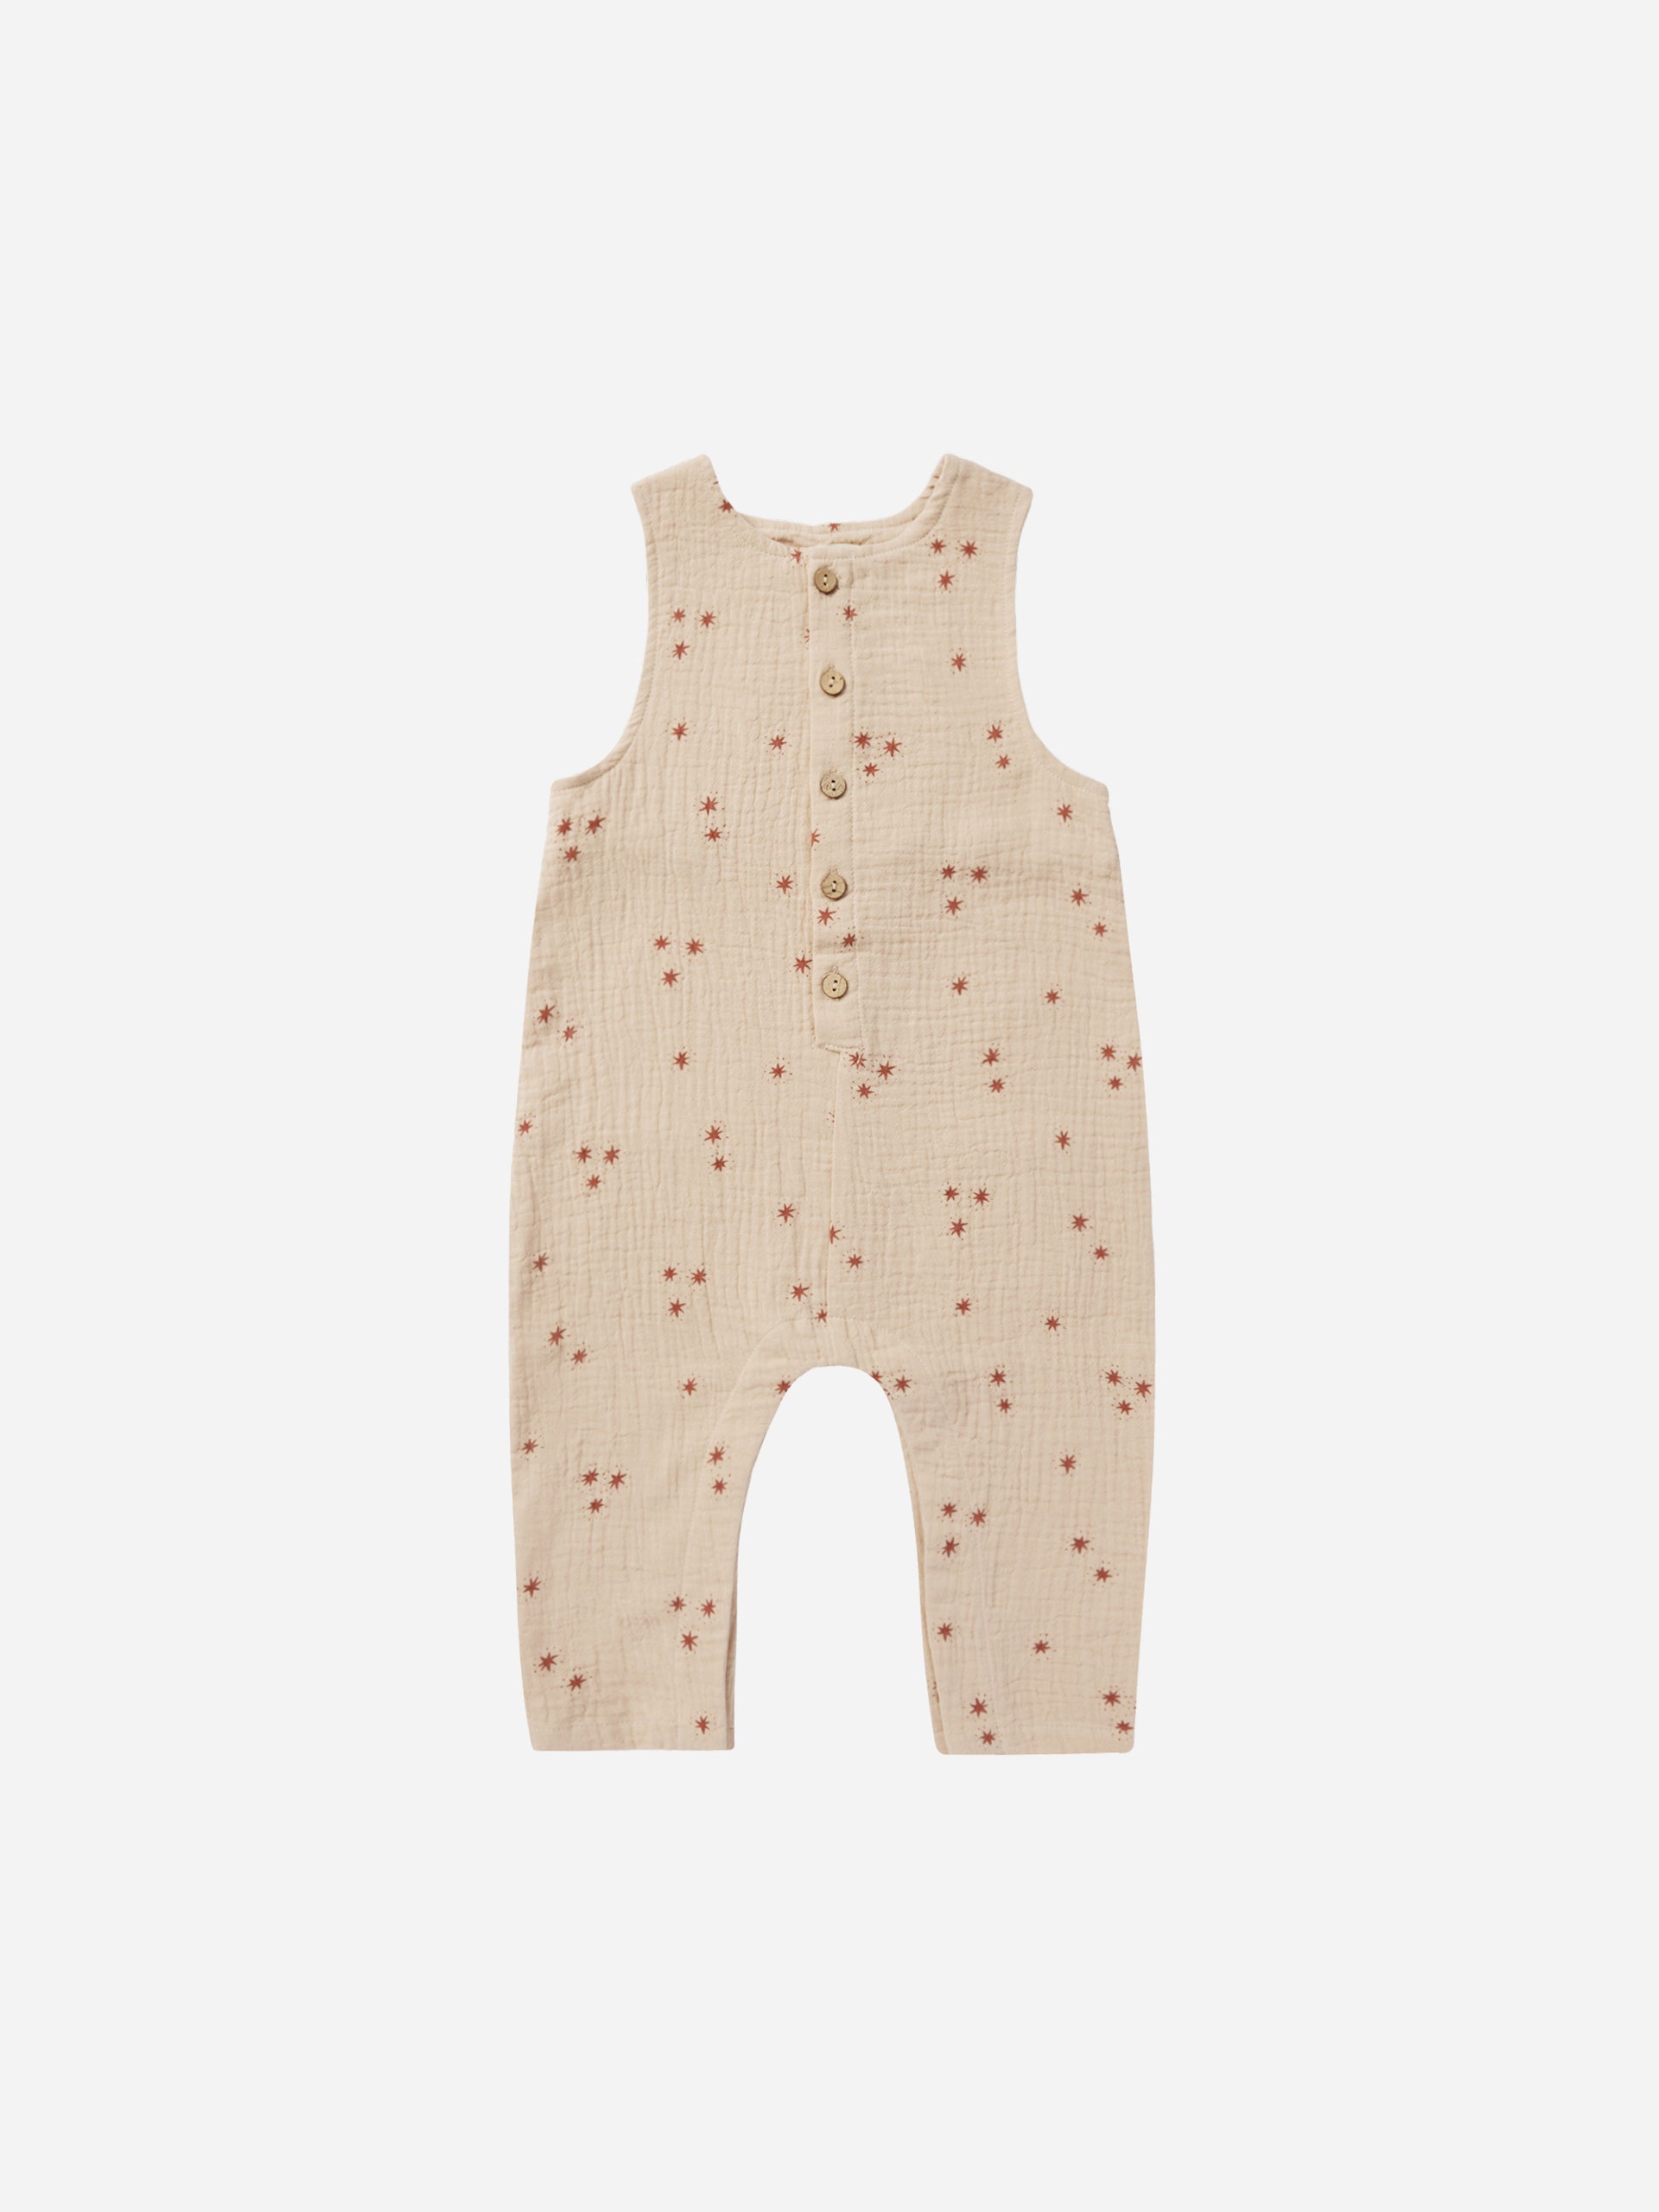 Button Jumpsuit || Starburst - Rylee + Cru | Kids Clothes | Trendy Baby Clothes | Modern Infant Outfits |